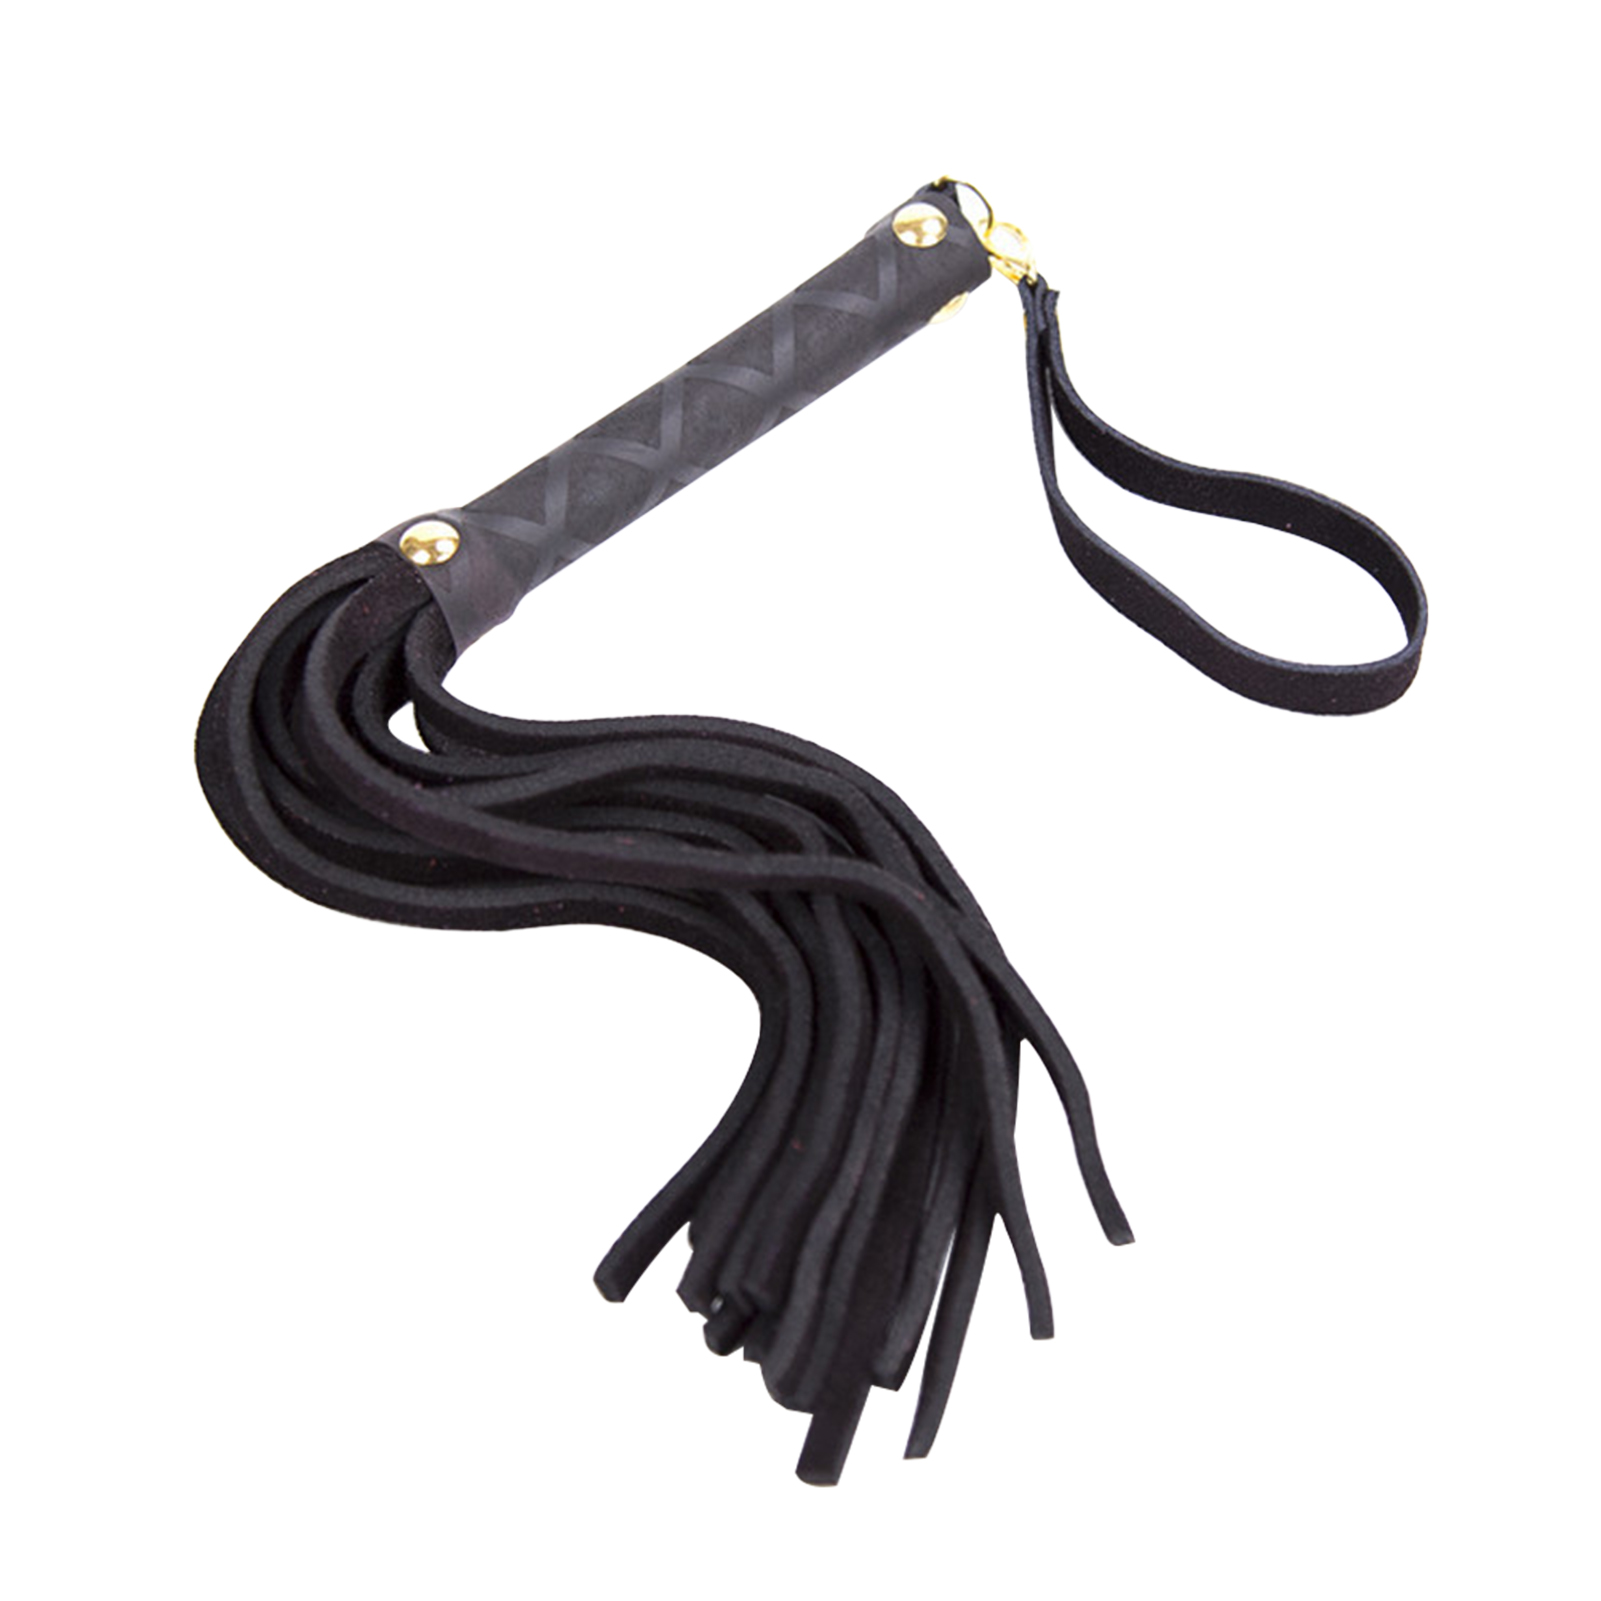 Awolf Horse Riding Whip Crop Leather Whip with Comfortable Handle Horse Whips and Crops for Equestrian Sports Teaching Training Tool 